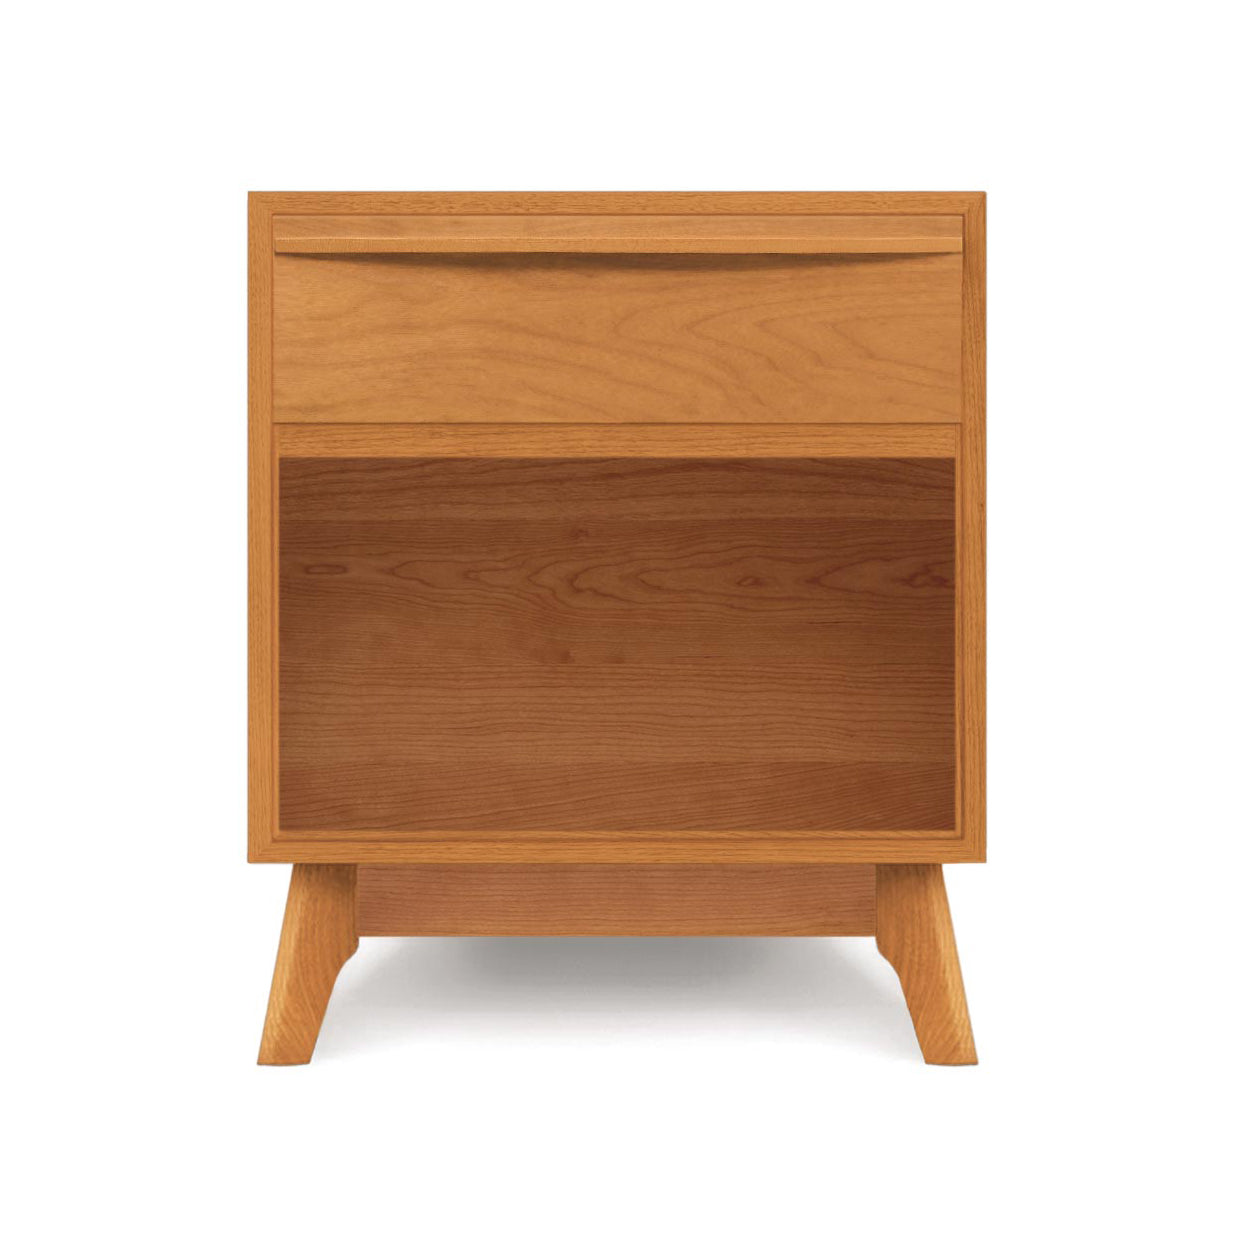 The Catalina 1-Drawer Enclosed Shelf Nightstand by Copeland Furniture is a modern addition to any bedroom, made of solid wood and featuring two drawers.